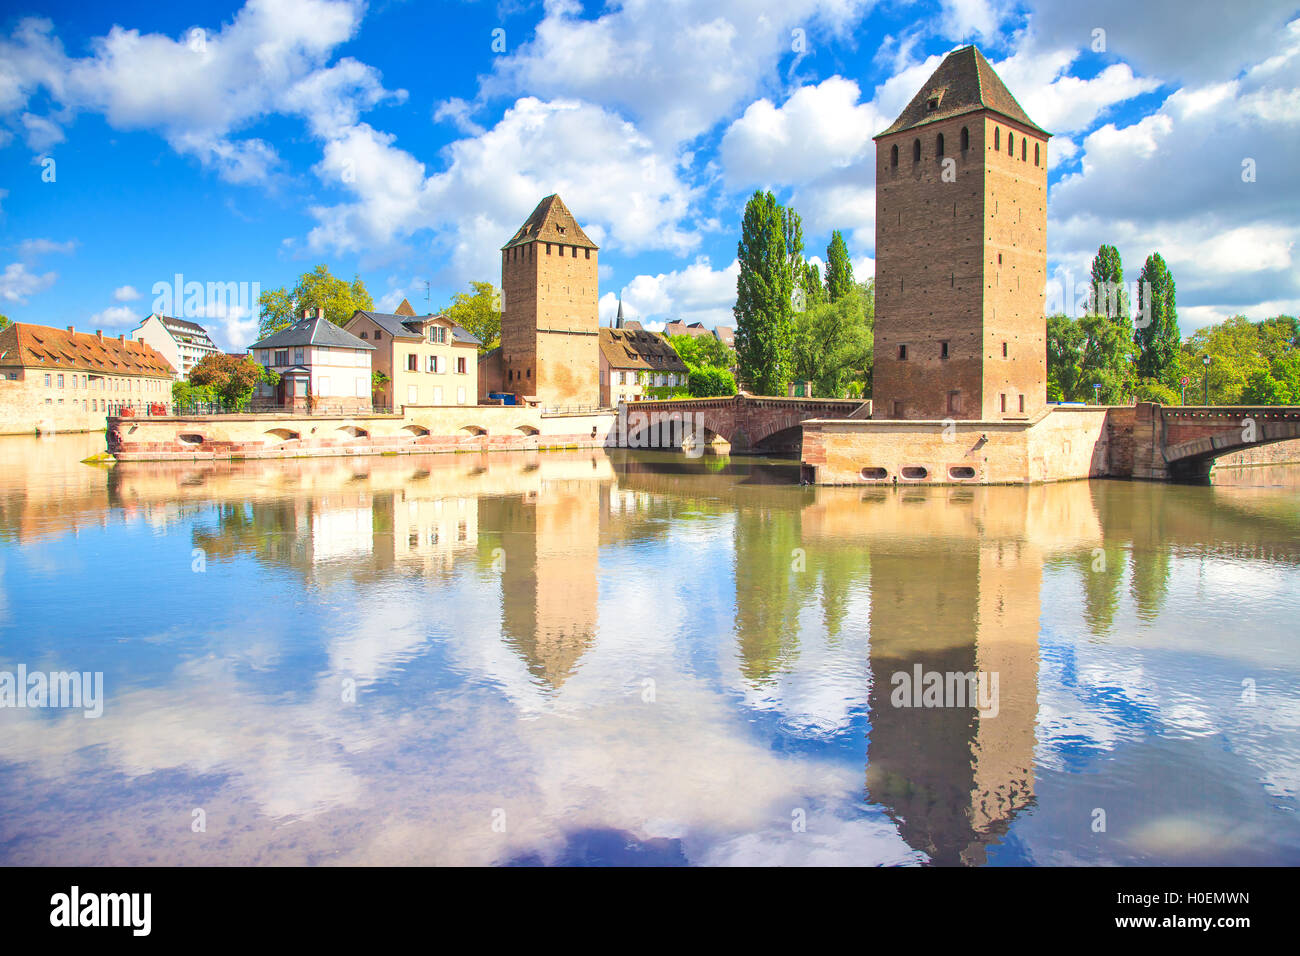 Strasbourg, tower of medieval bridge Ponts Couverts and reflection, Barrage Vauban. Alsace, France. Stock Photo